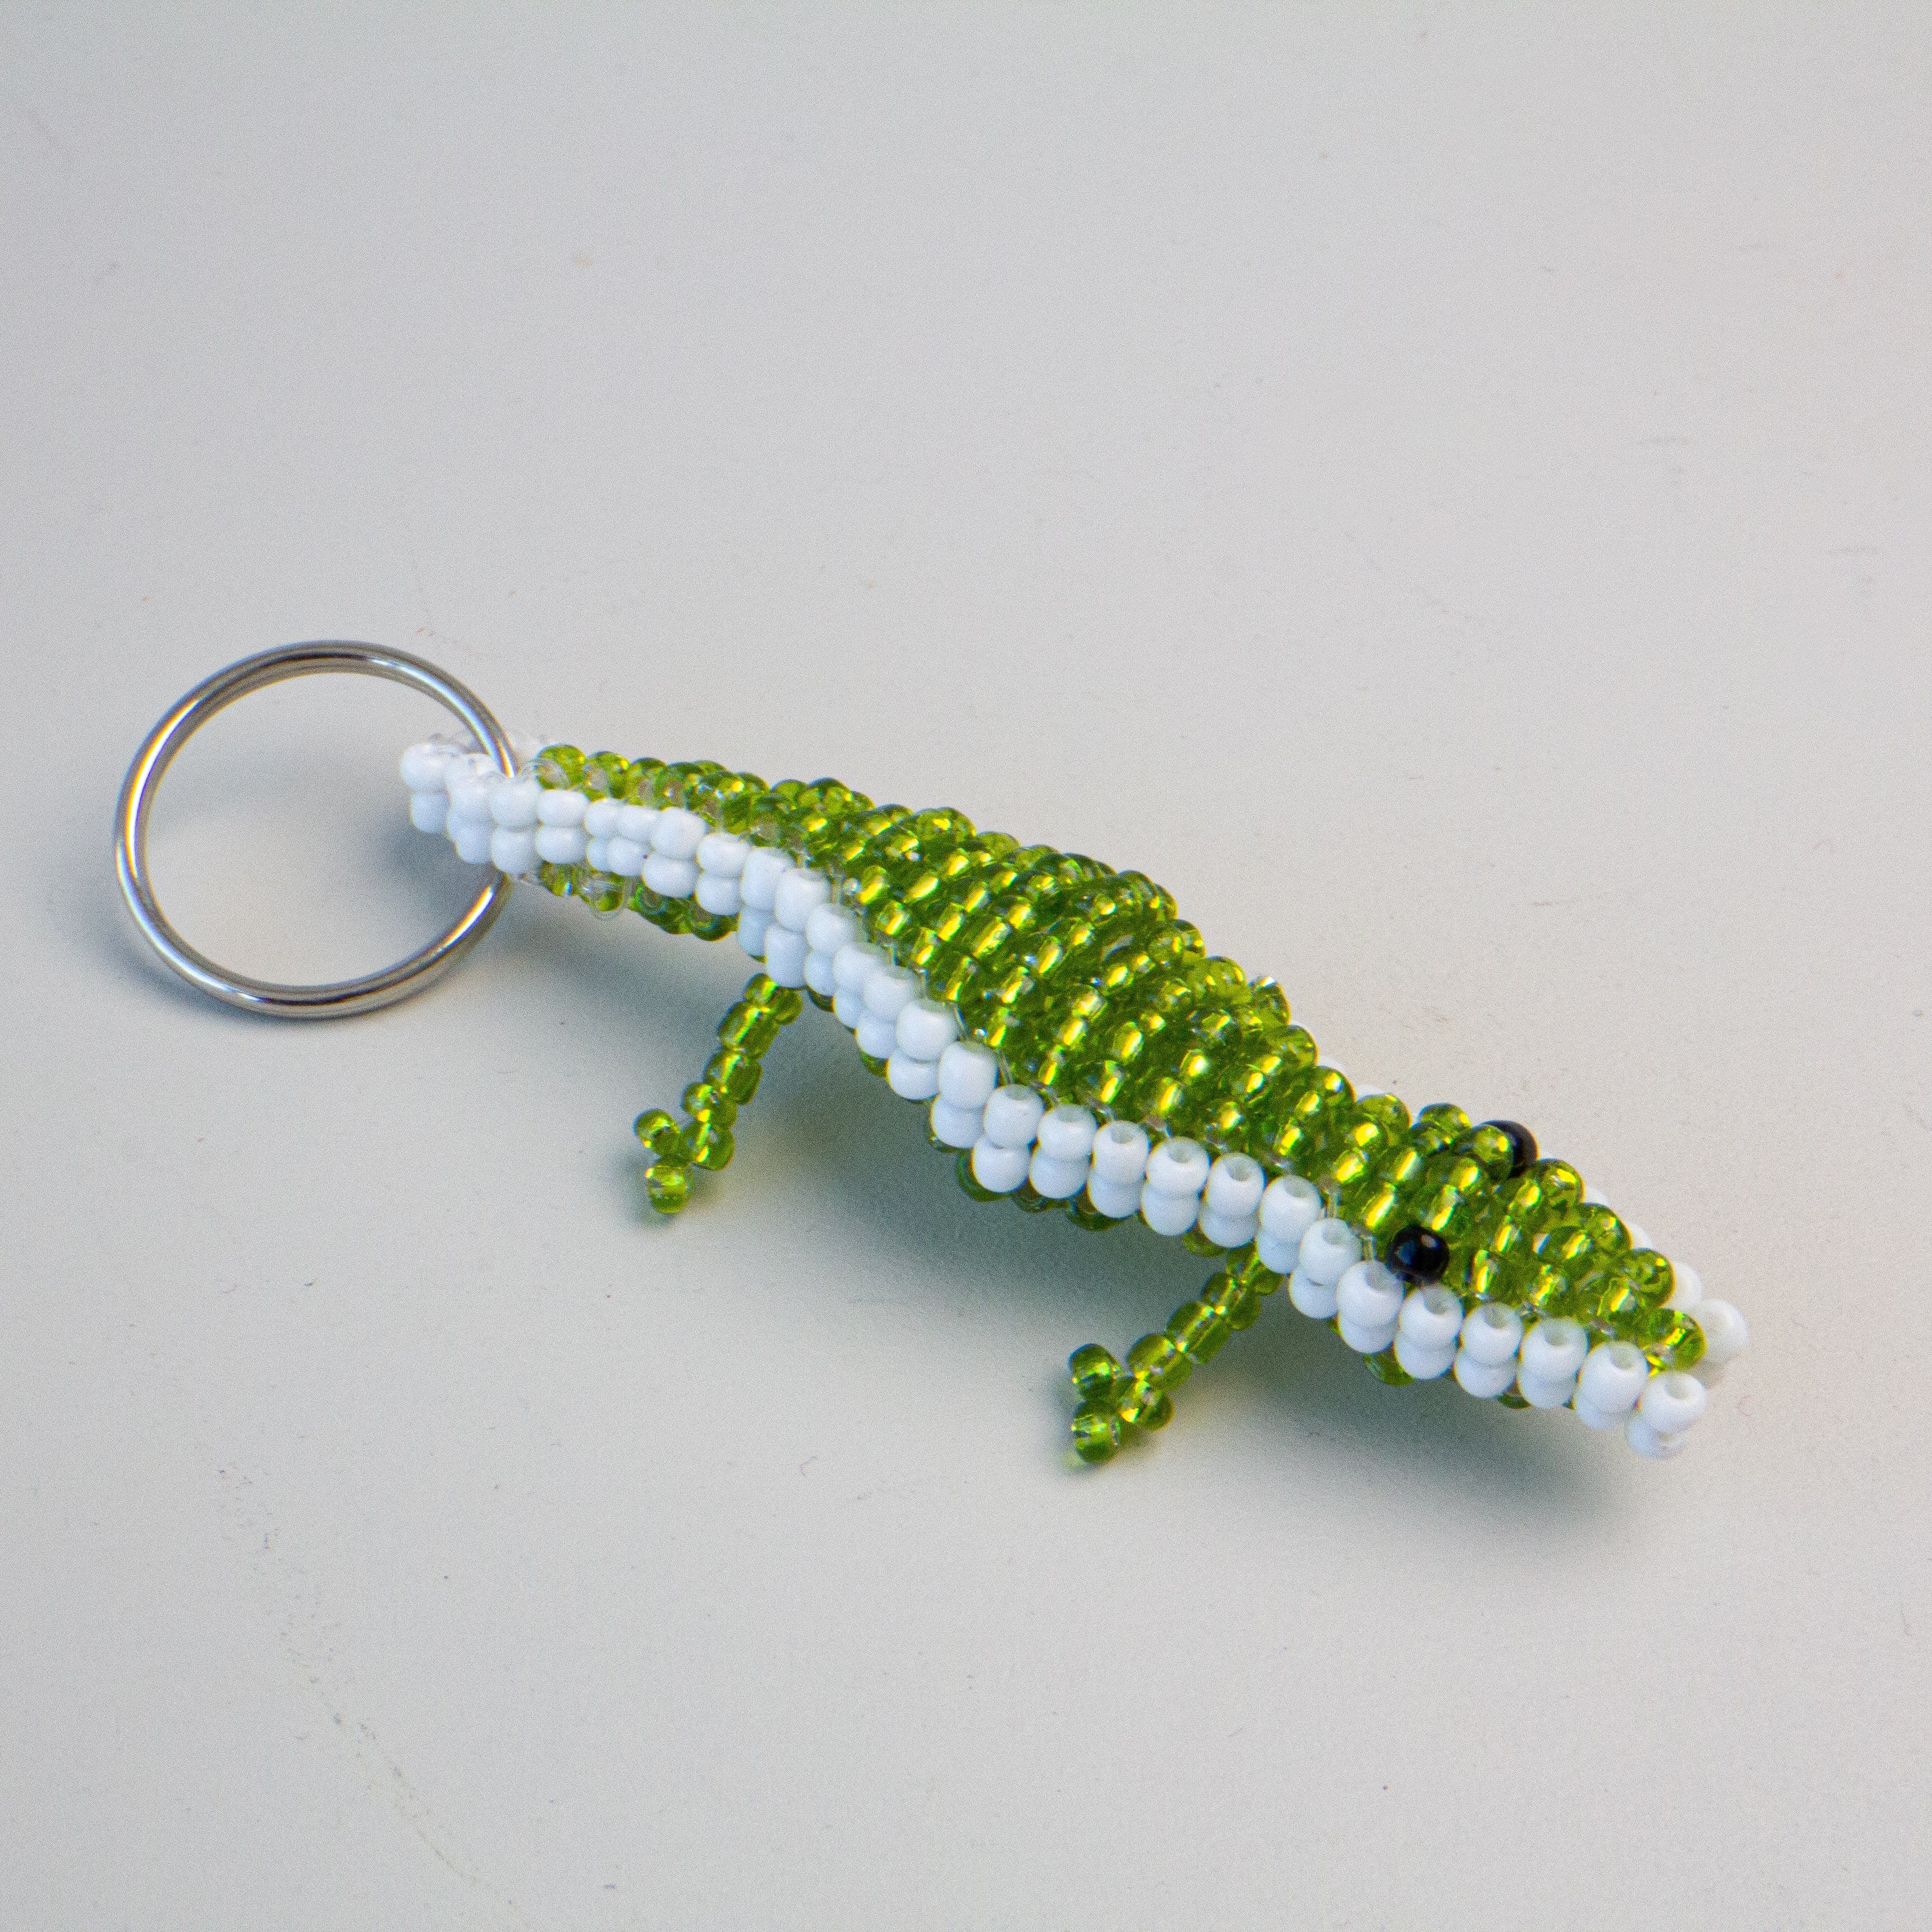 Beaded Animal Keychains - handmade by Kenyan market artisans for a Fair Trade boutique